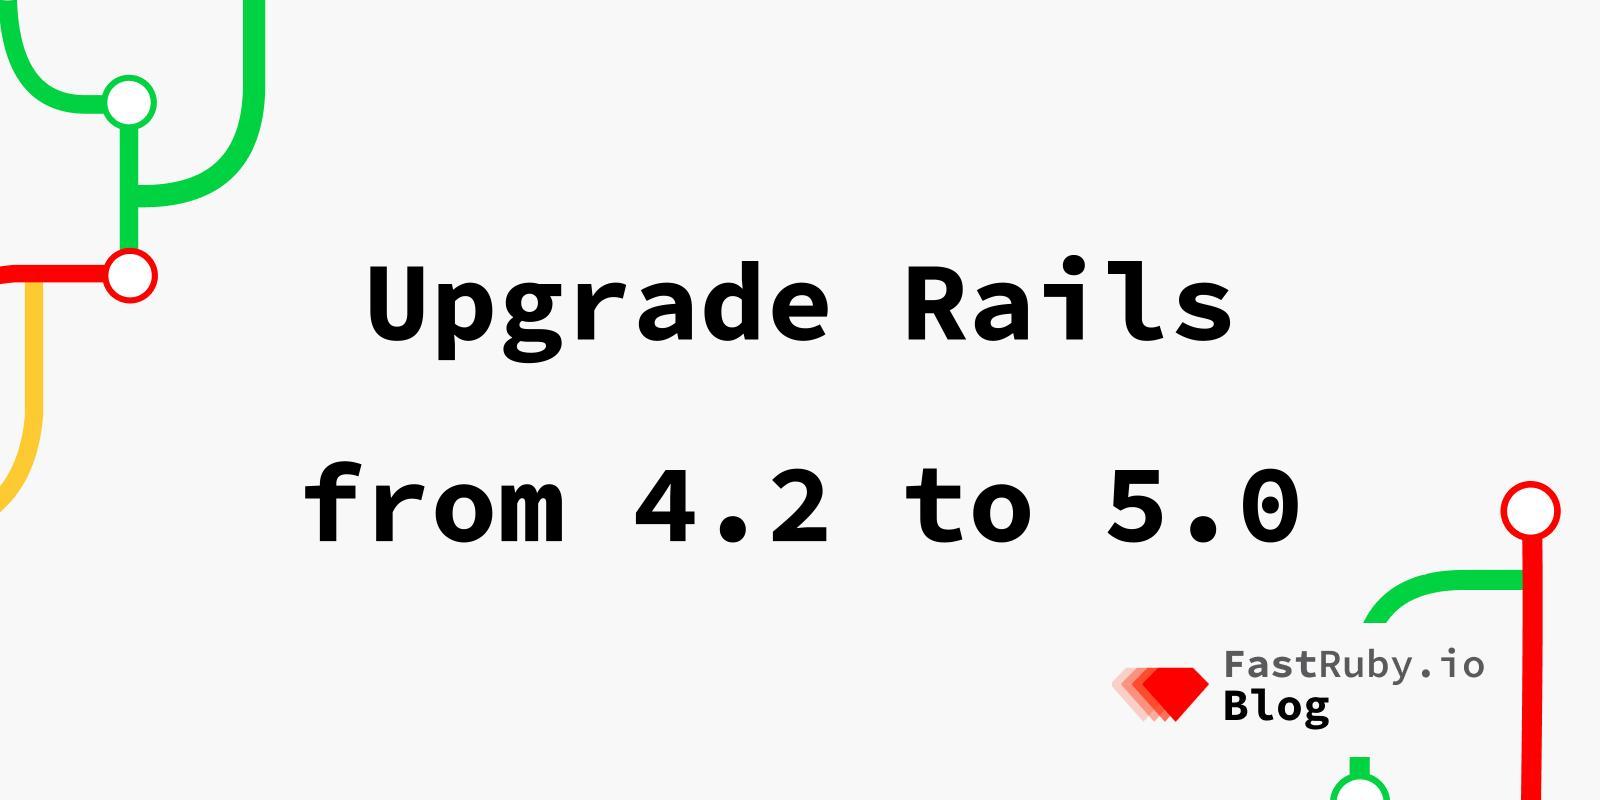 Upgrade Rails from 4.2 to 5.0